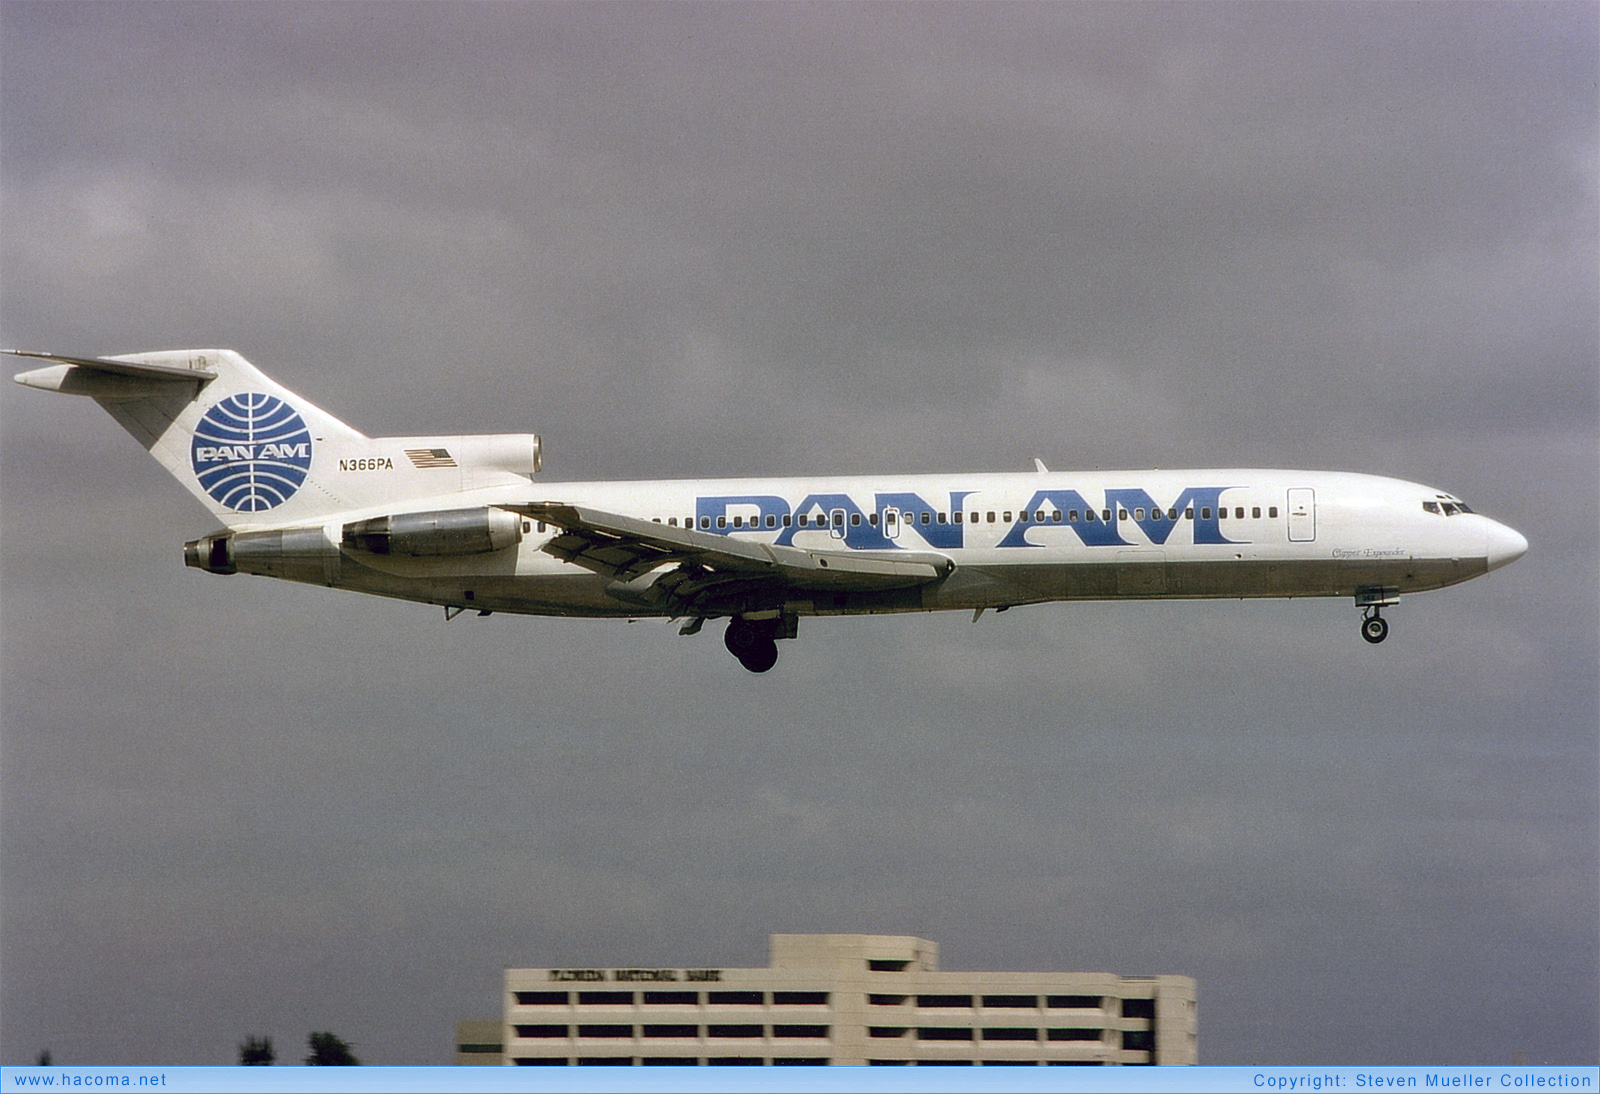 Photo of N366PA - Pan Am Clipper Expounder - Miami International Airport - 1989